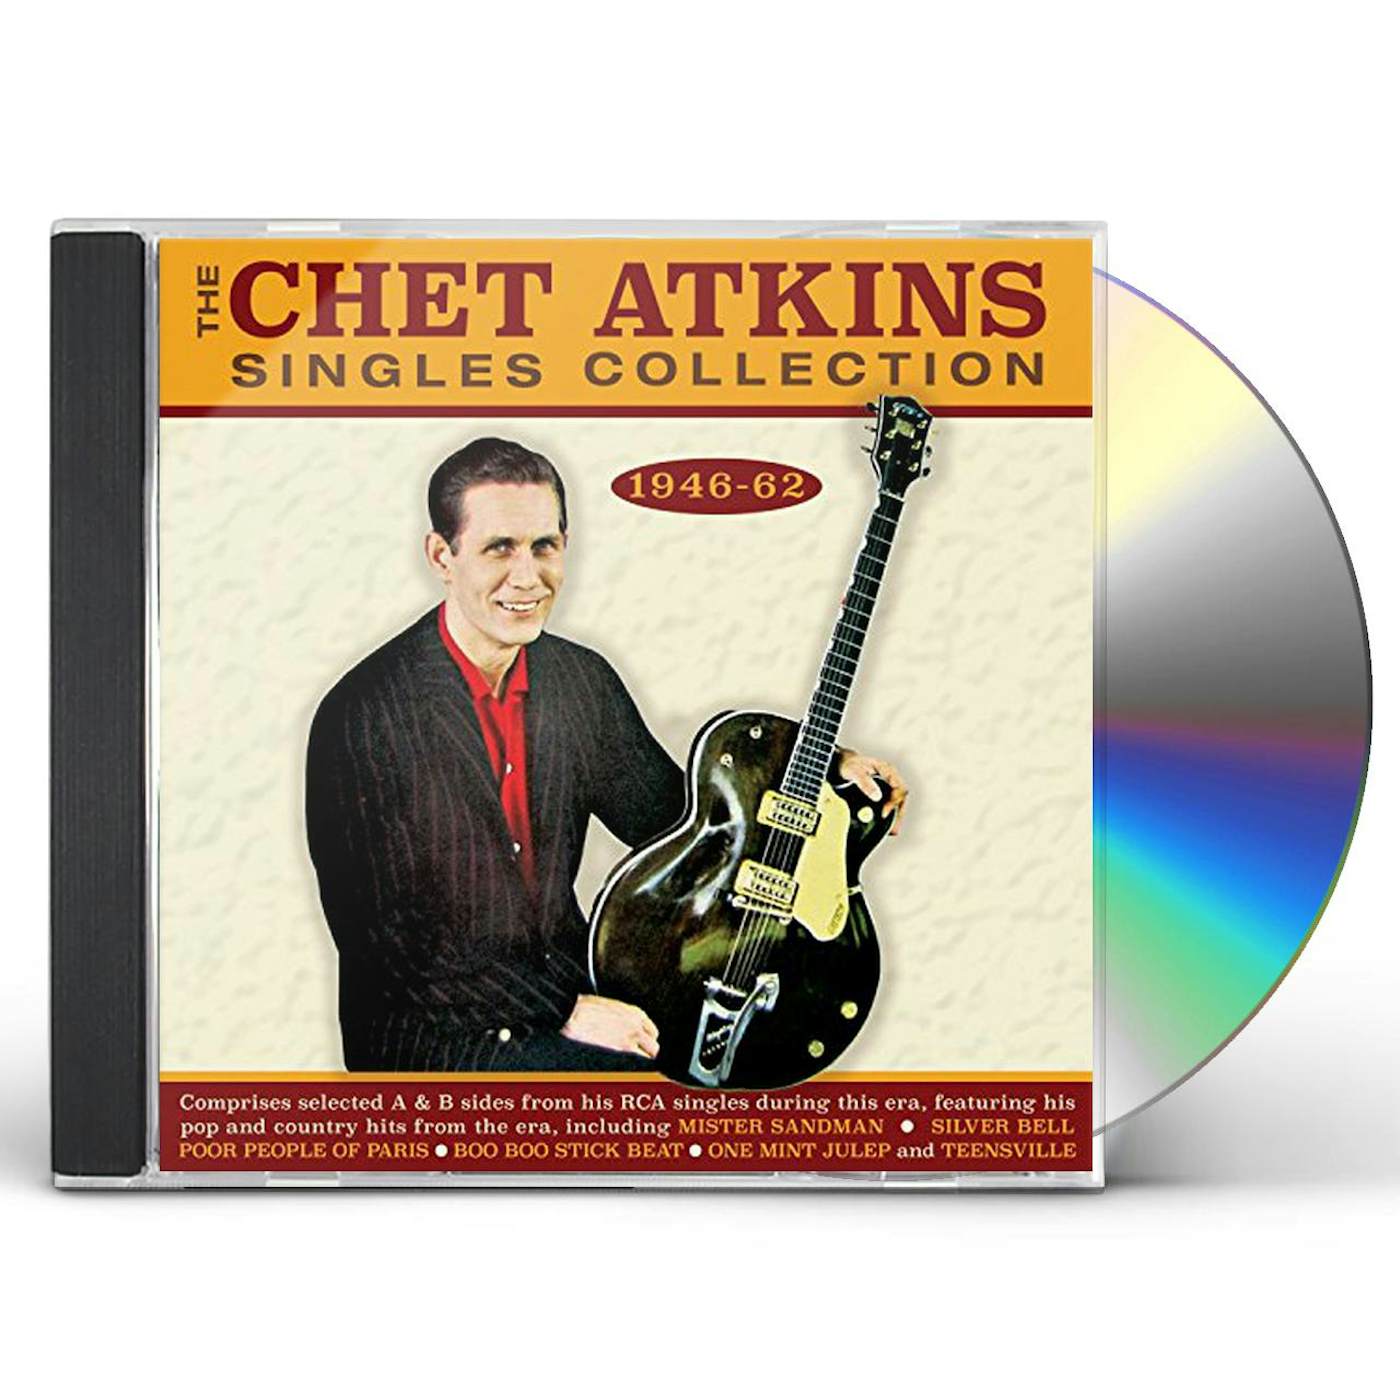 Chet Atkins SINGLES COLLECTION 1946-62 CD